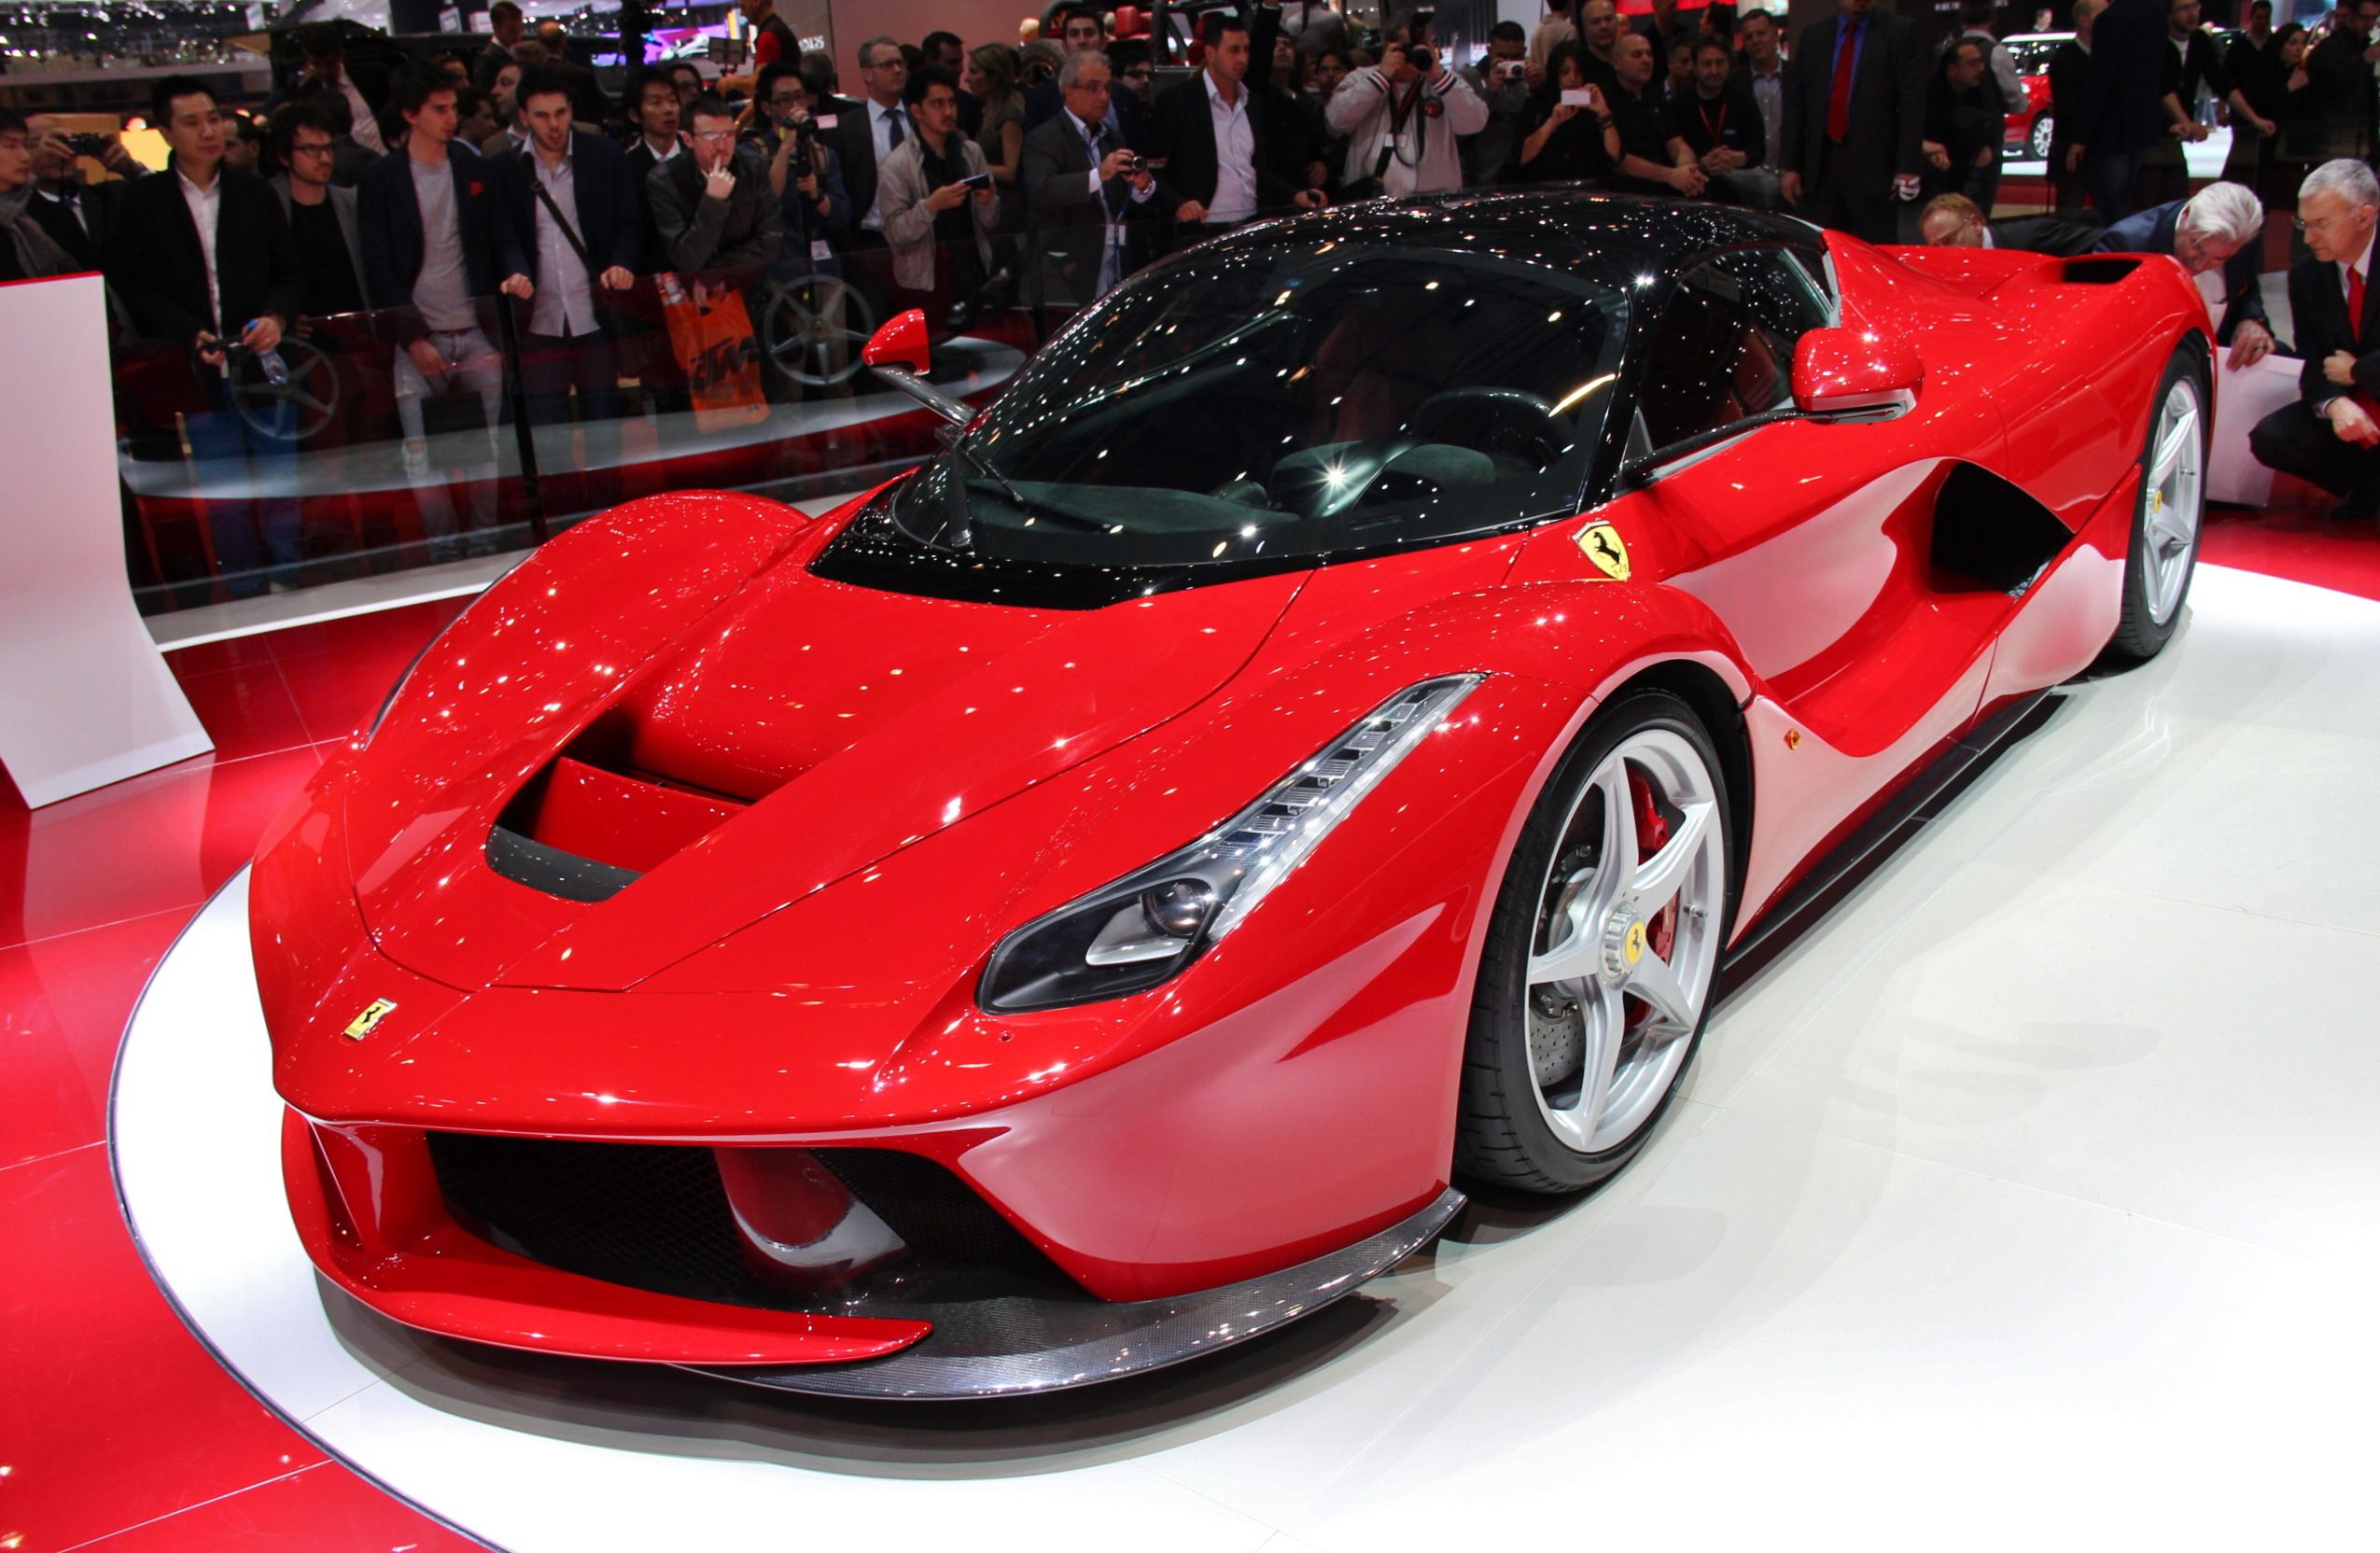 2014 Ferrari Will Use Turbocharged and Hybrid Systems to Reduce CO2 Emissions